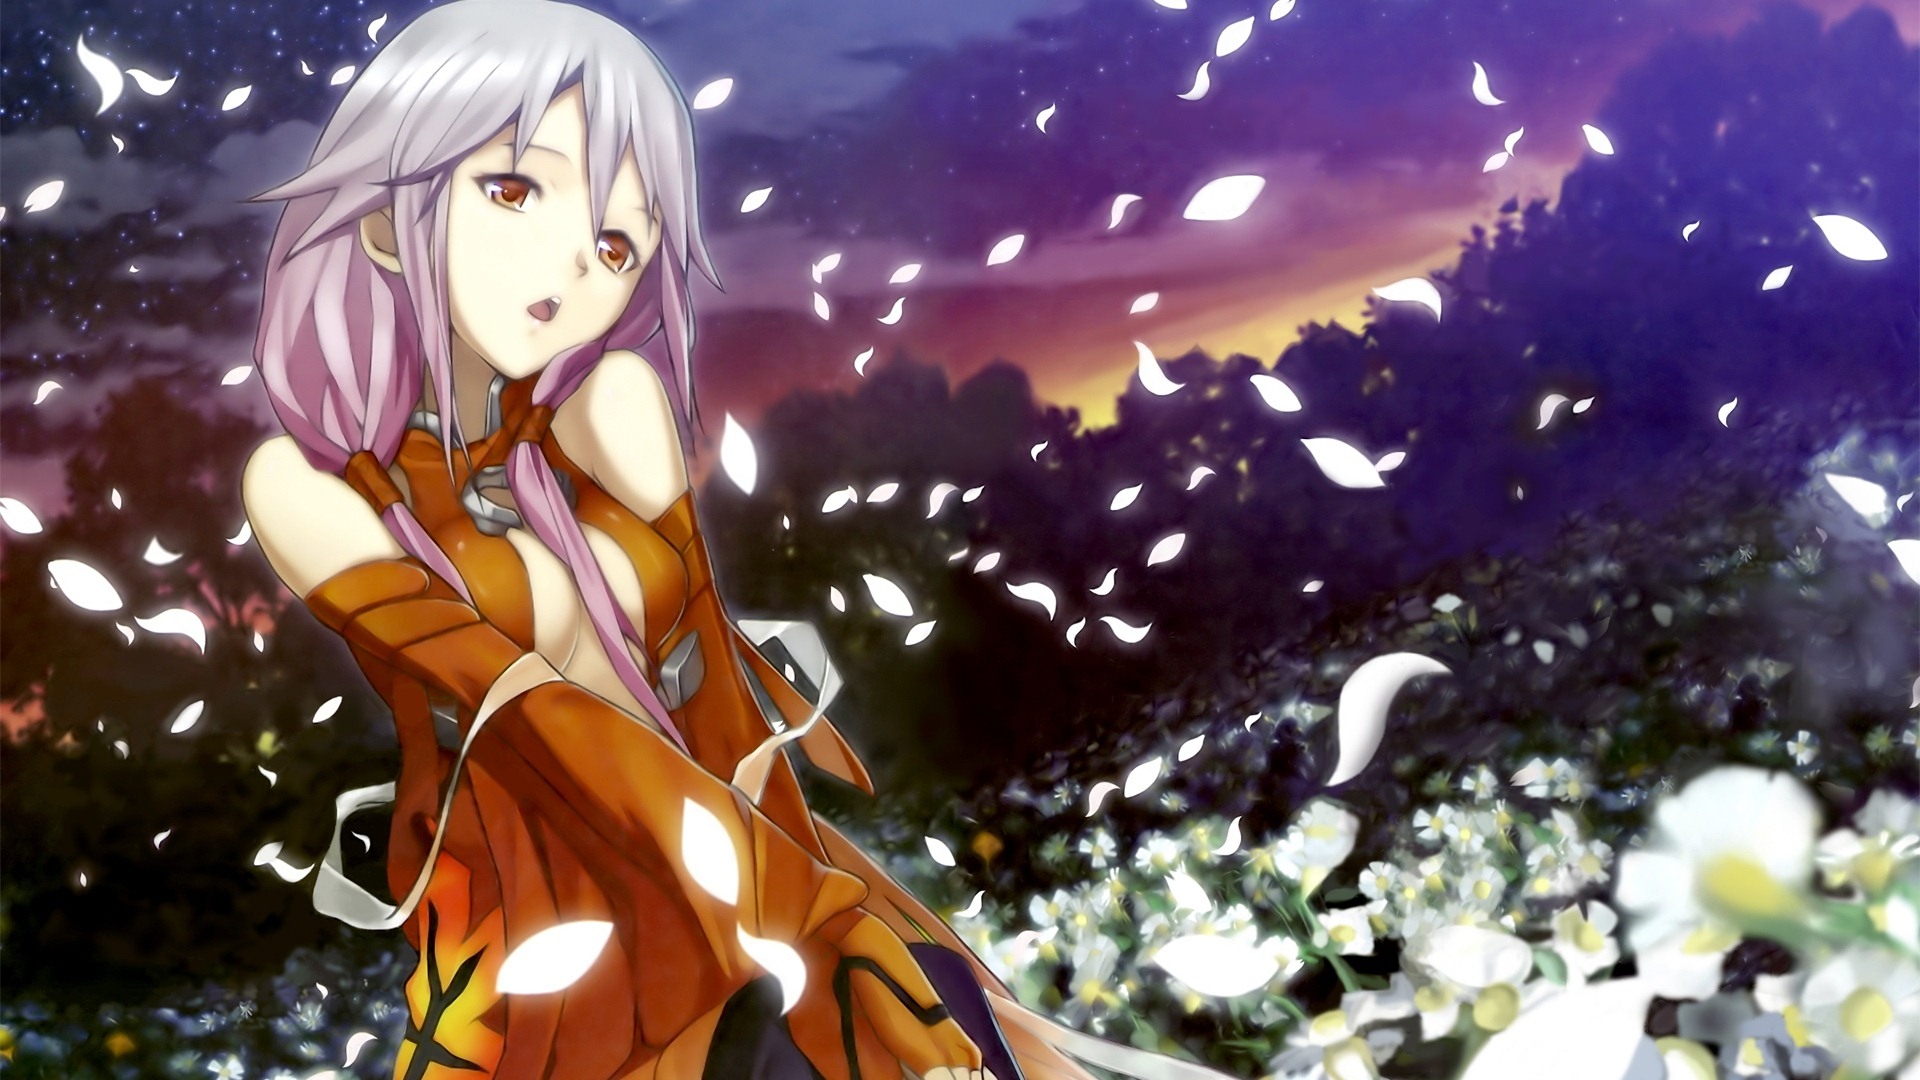 Guilty Crown 罪恶王冠 高清壁纸7 - 1920x1080